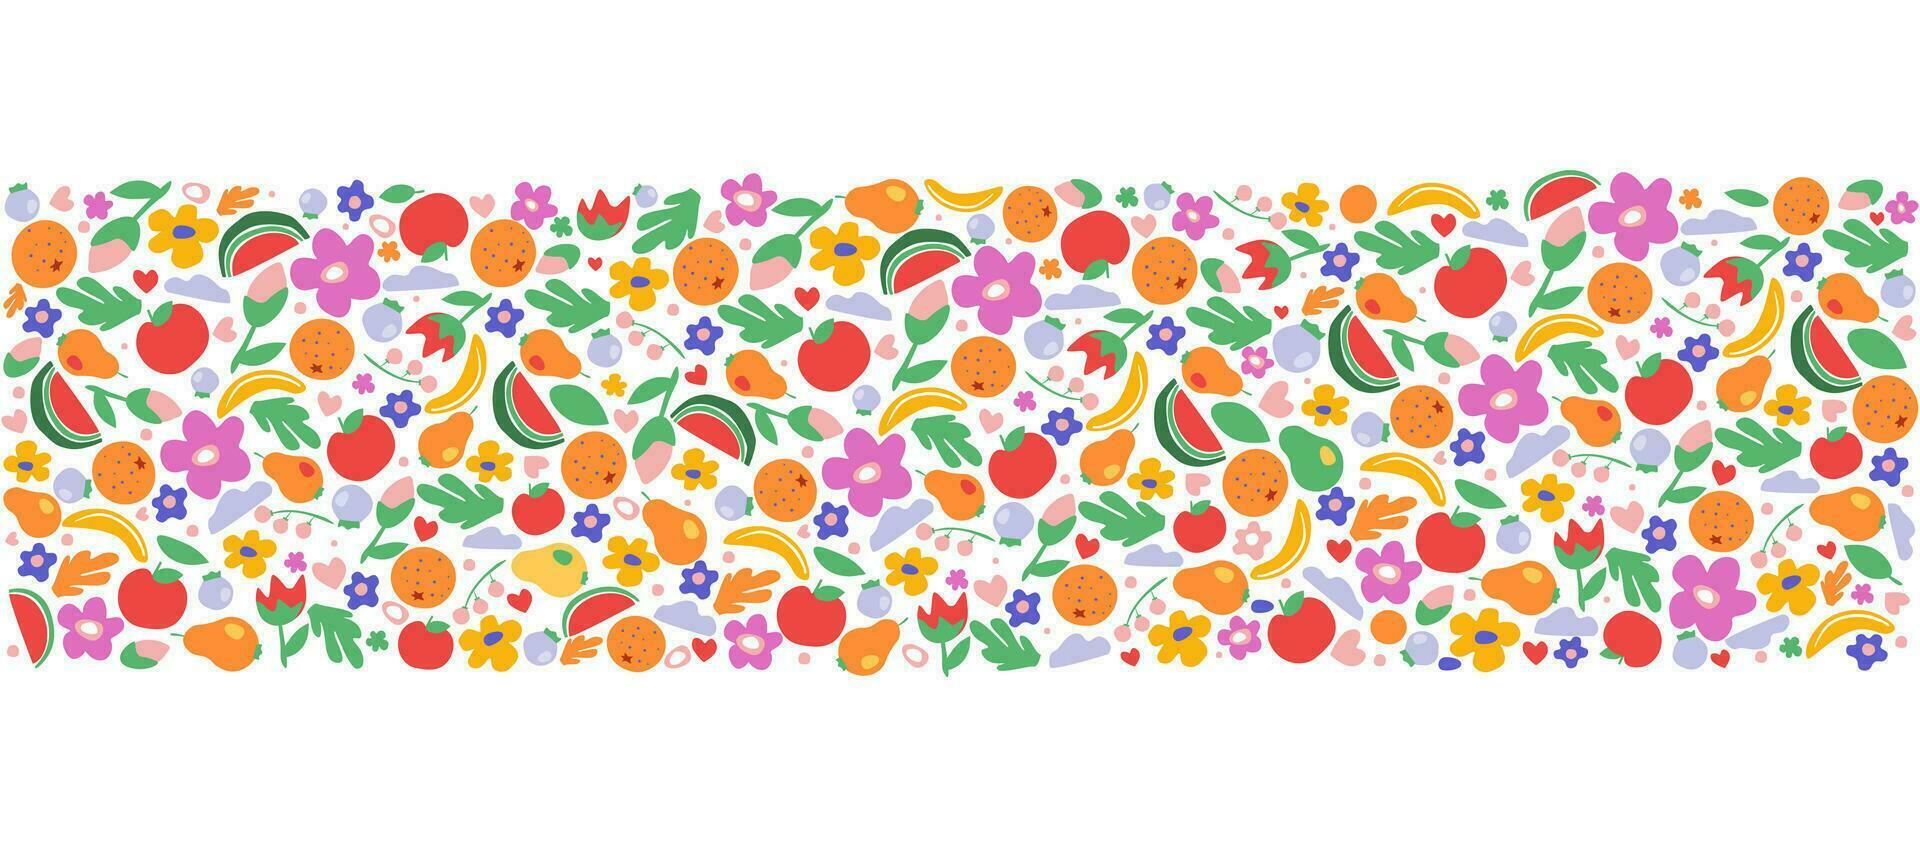 Horizontal ornament with different simple elements and shapes. Fruits, flowers, berries, plants in random order for summer print. Vector graphics.